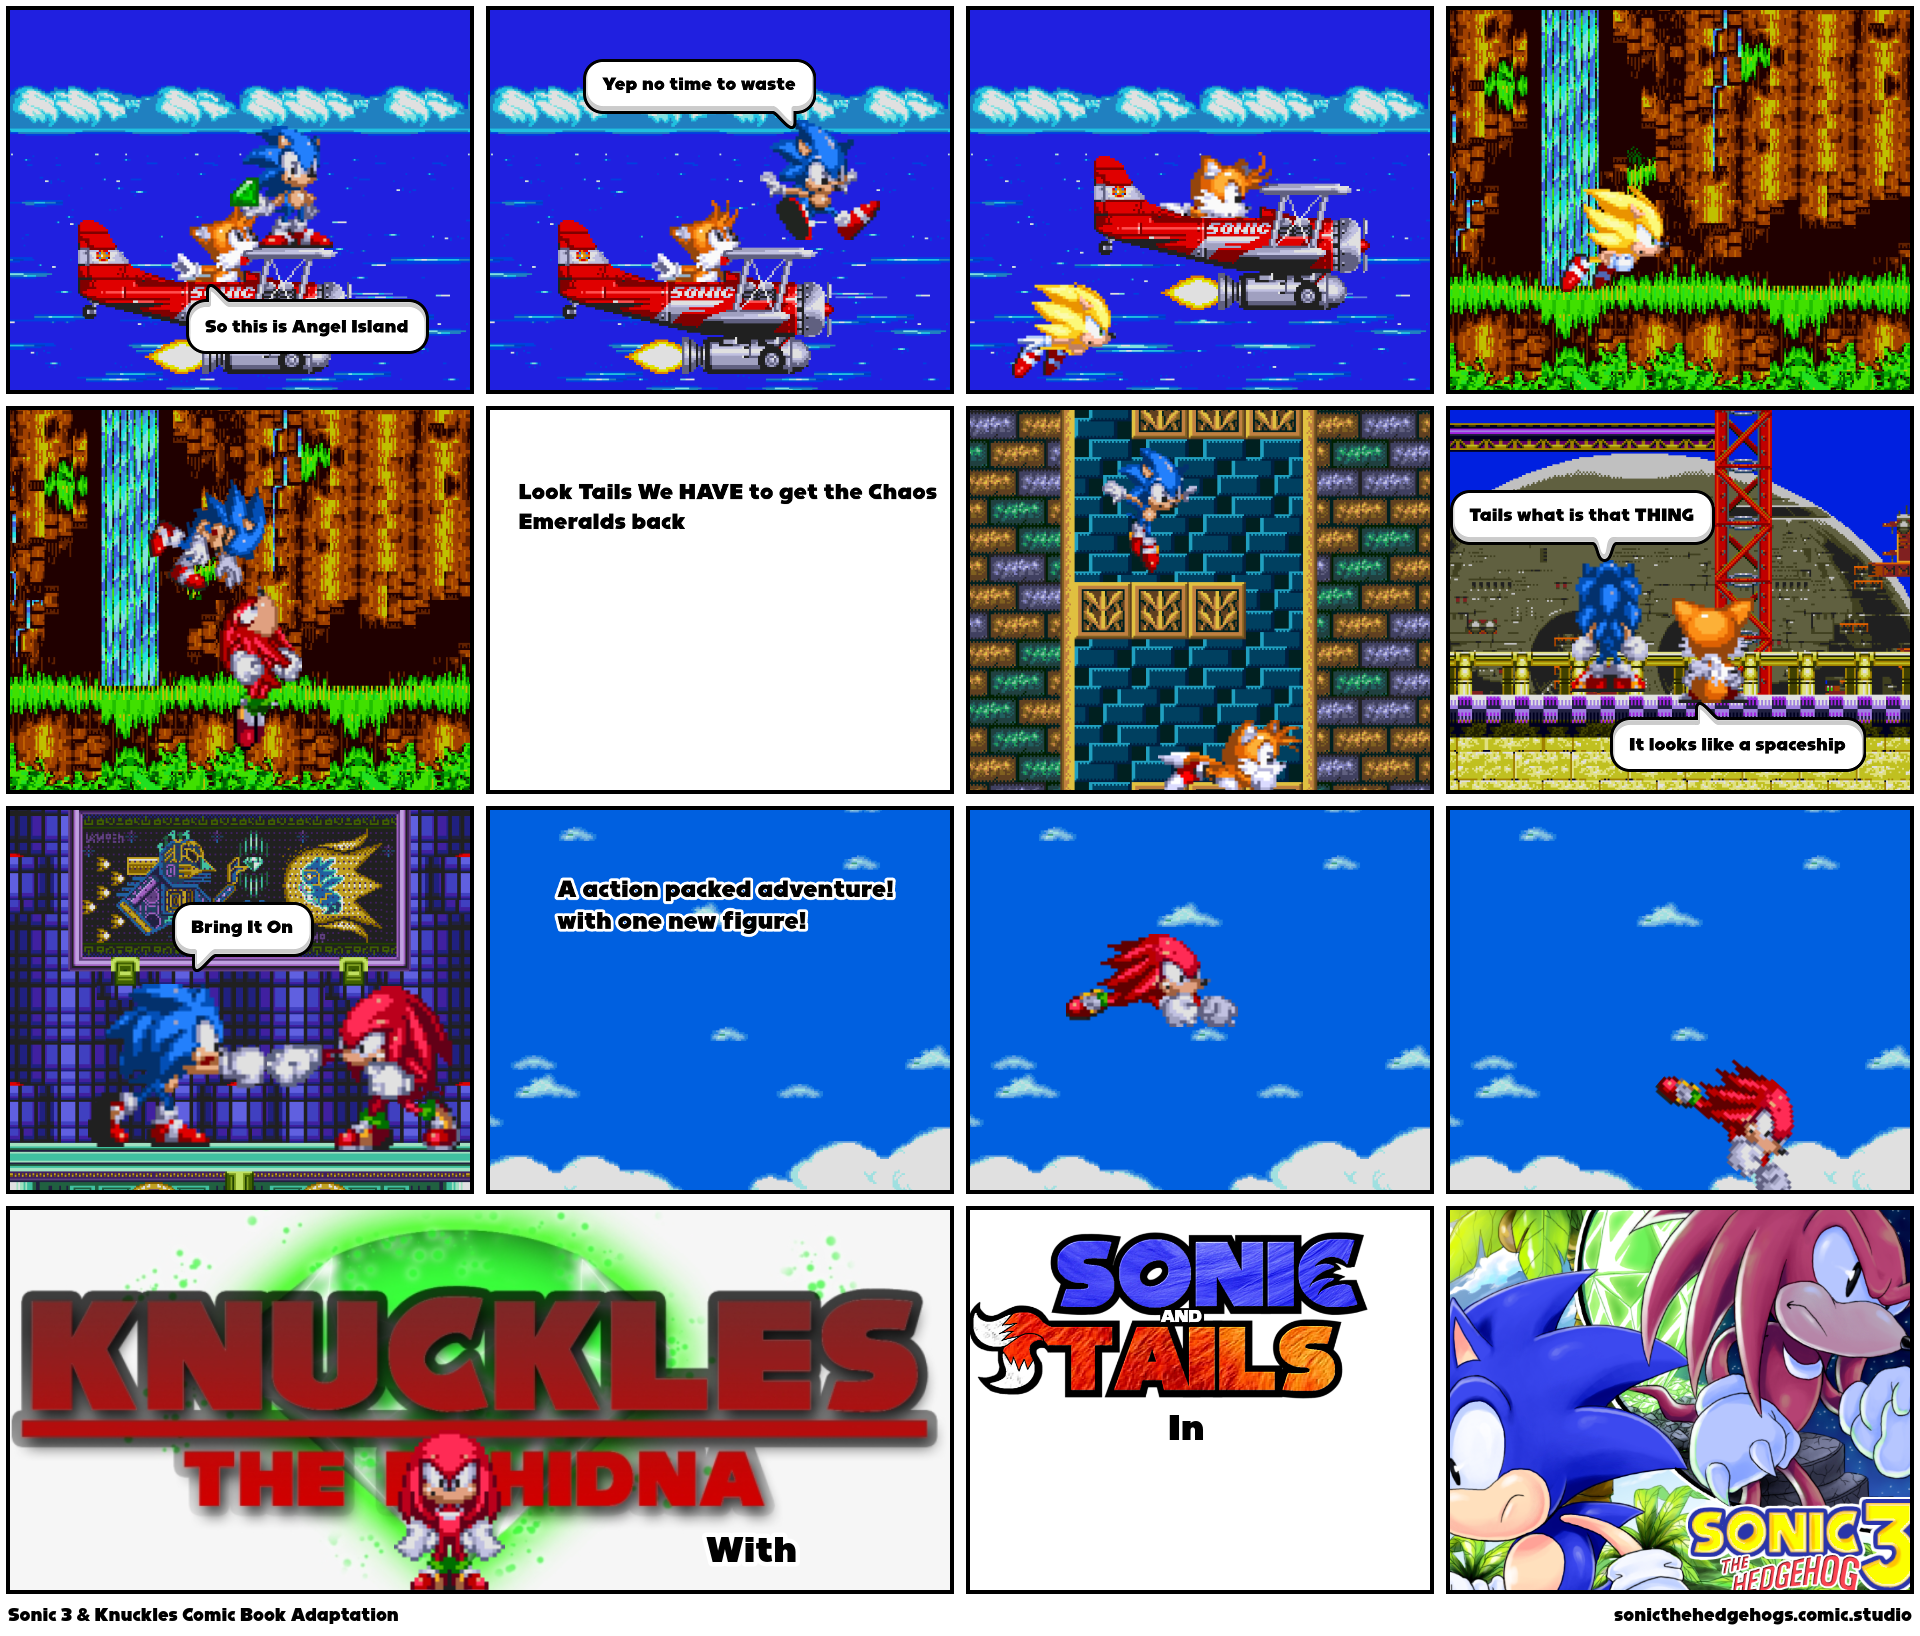 Sonic 3 & Knuckles Comic Book Adaptation